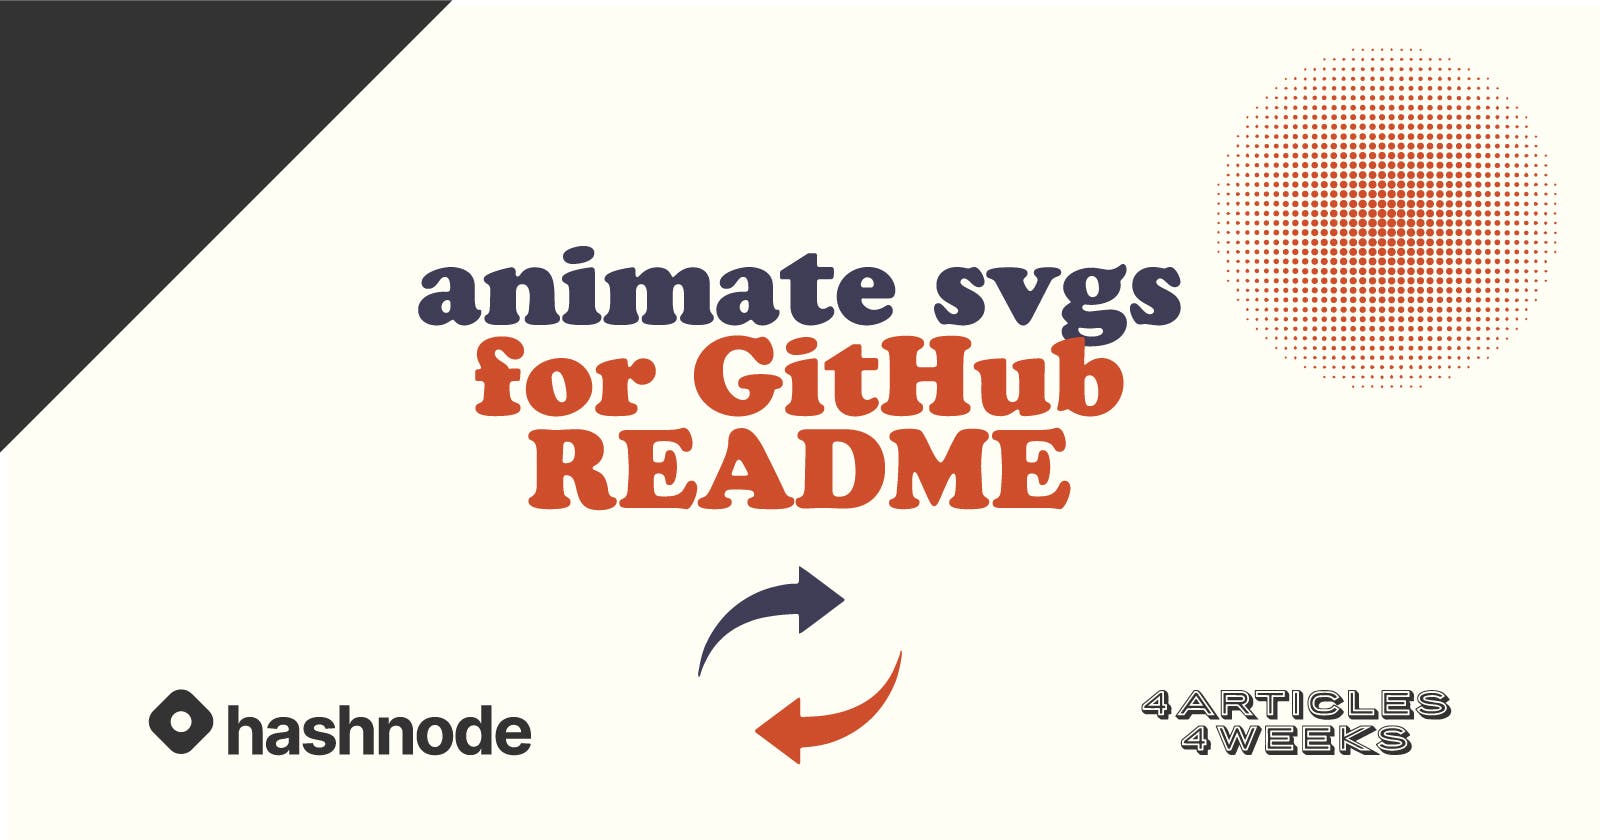 Animate SVGs for GitHub READMEs